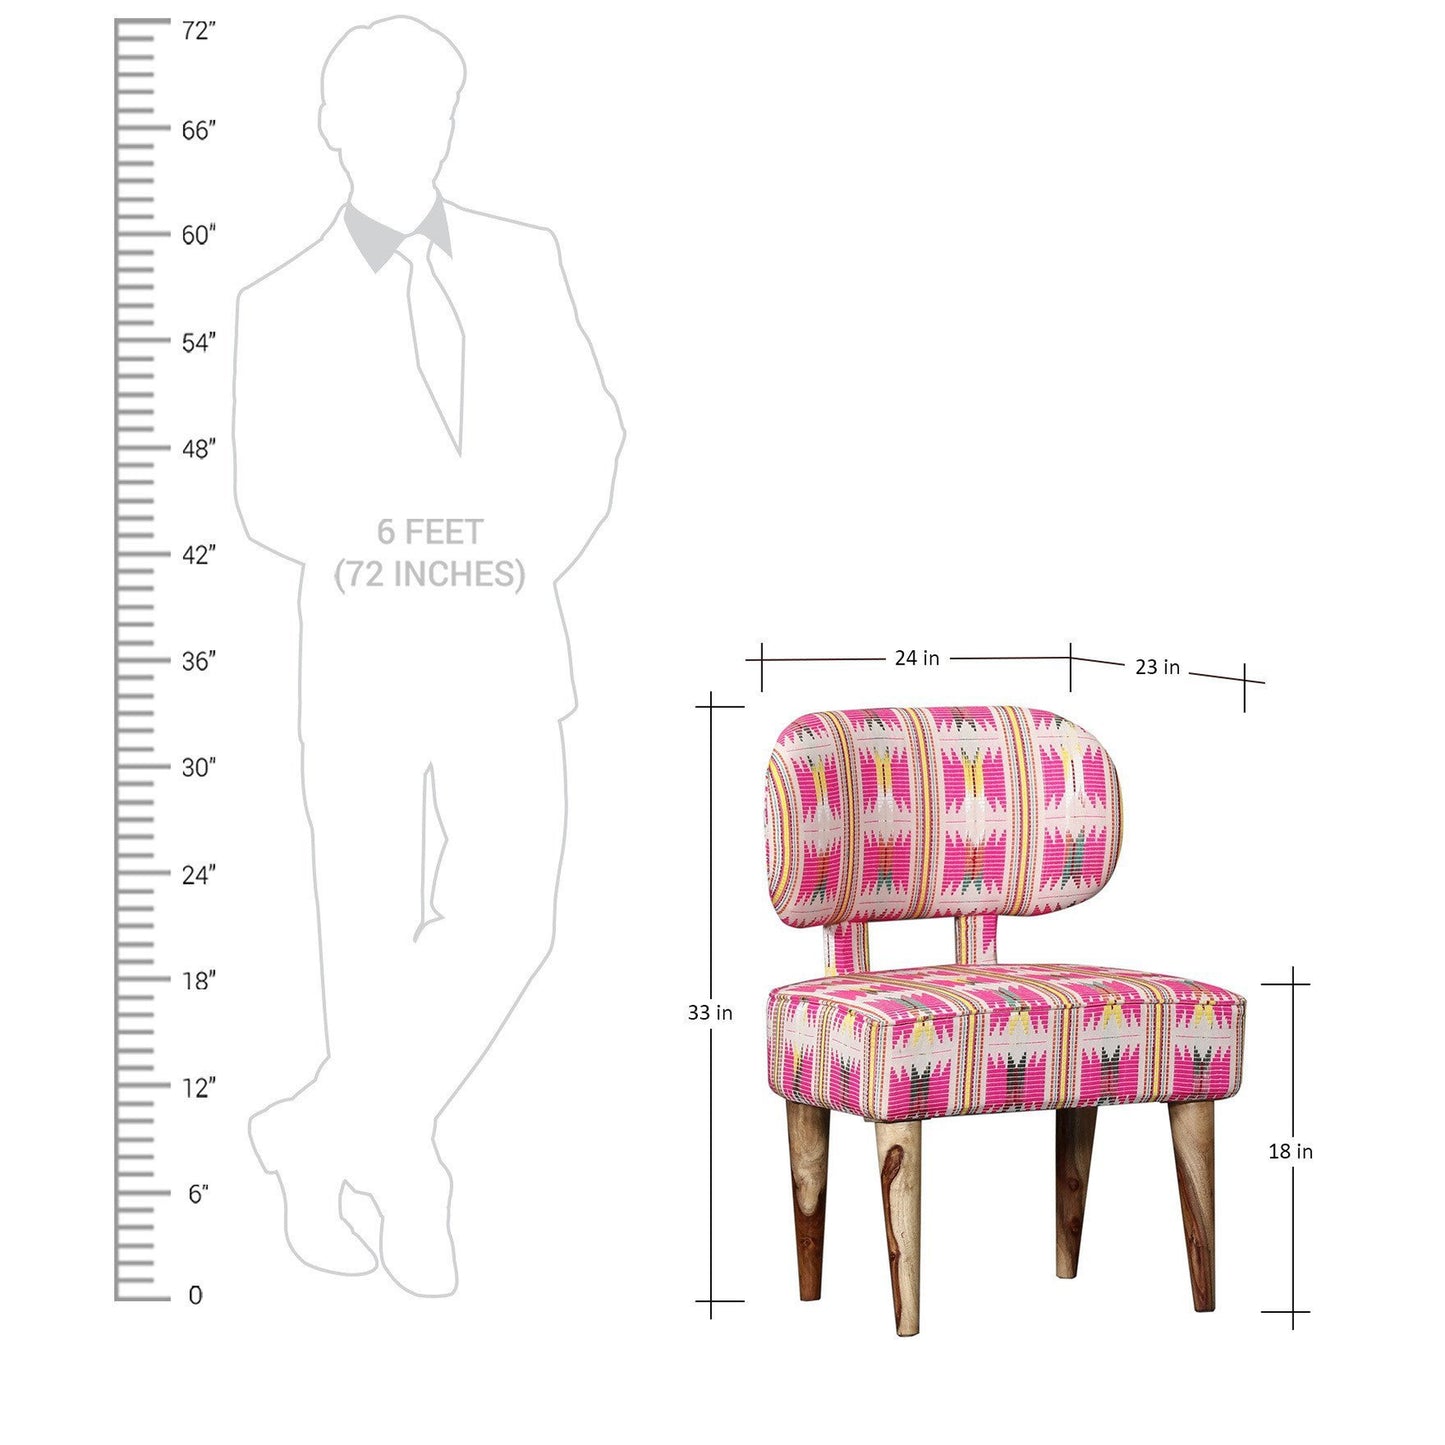 Fabric Upholstered Wooden Chair-Pink - The Teal Thread